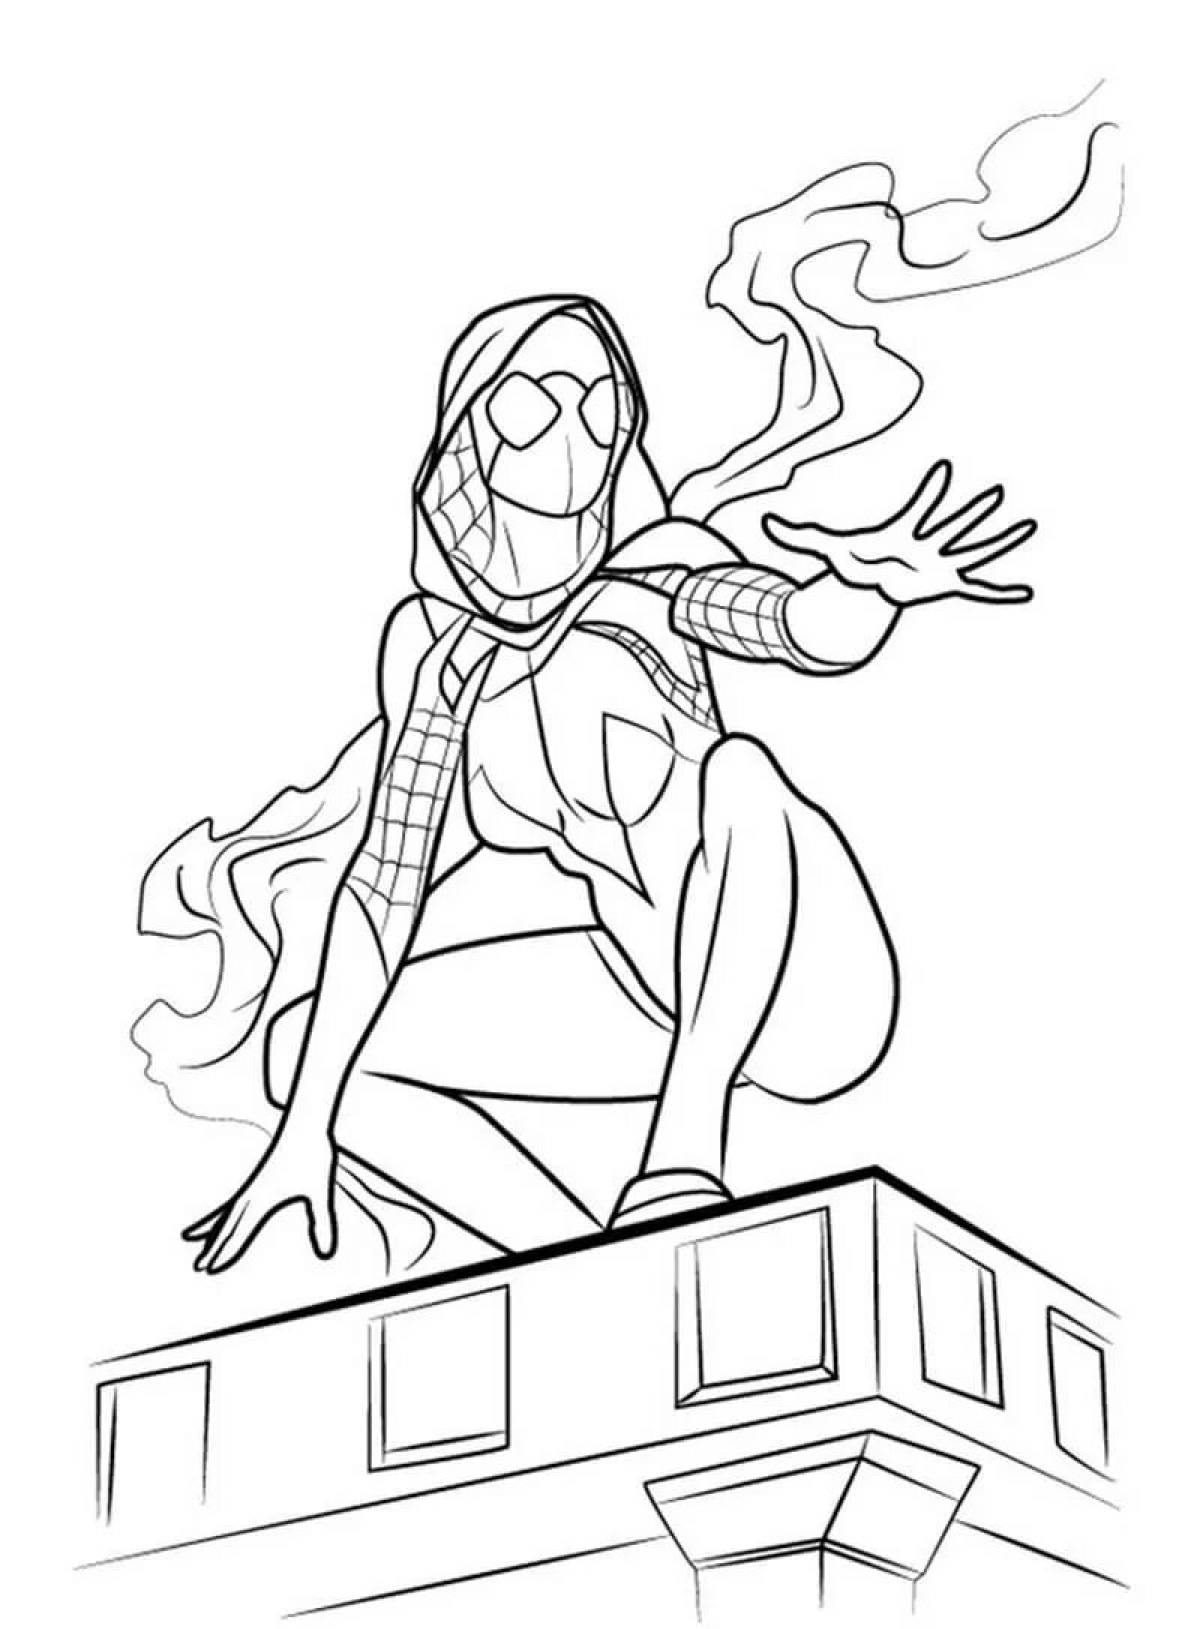 Coloring page of an attractive spider-man